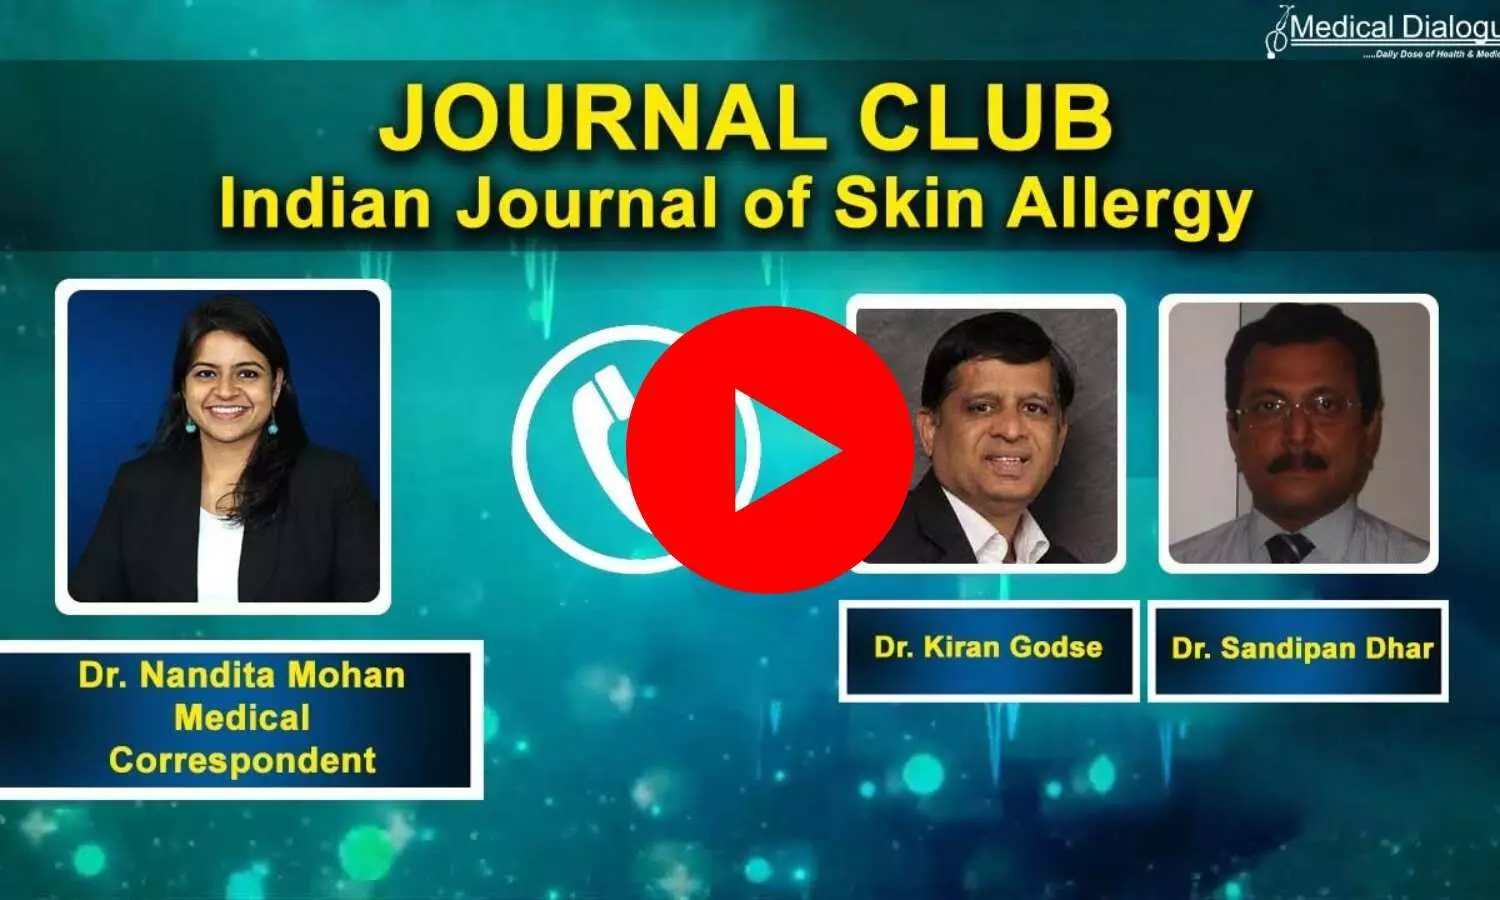 Know your Journal - Indian Journal of Skin Allergy- Ft Prof. Dr Kiran Godse and Dr Sandipan Dhar